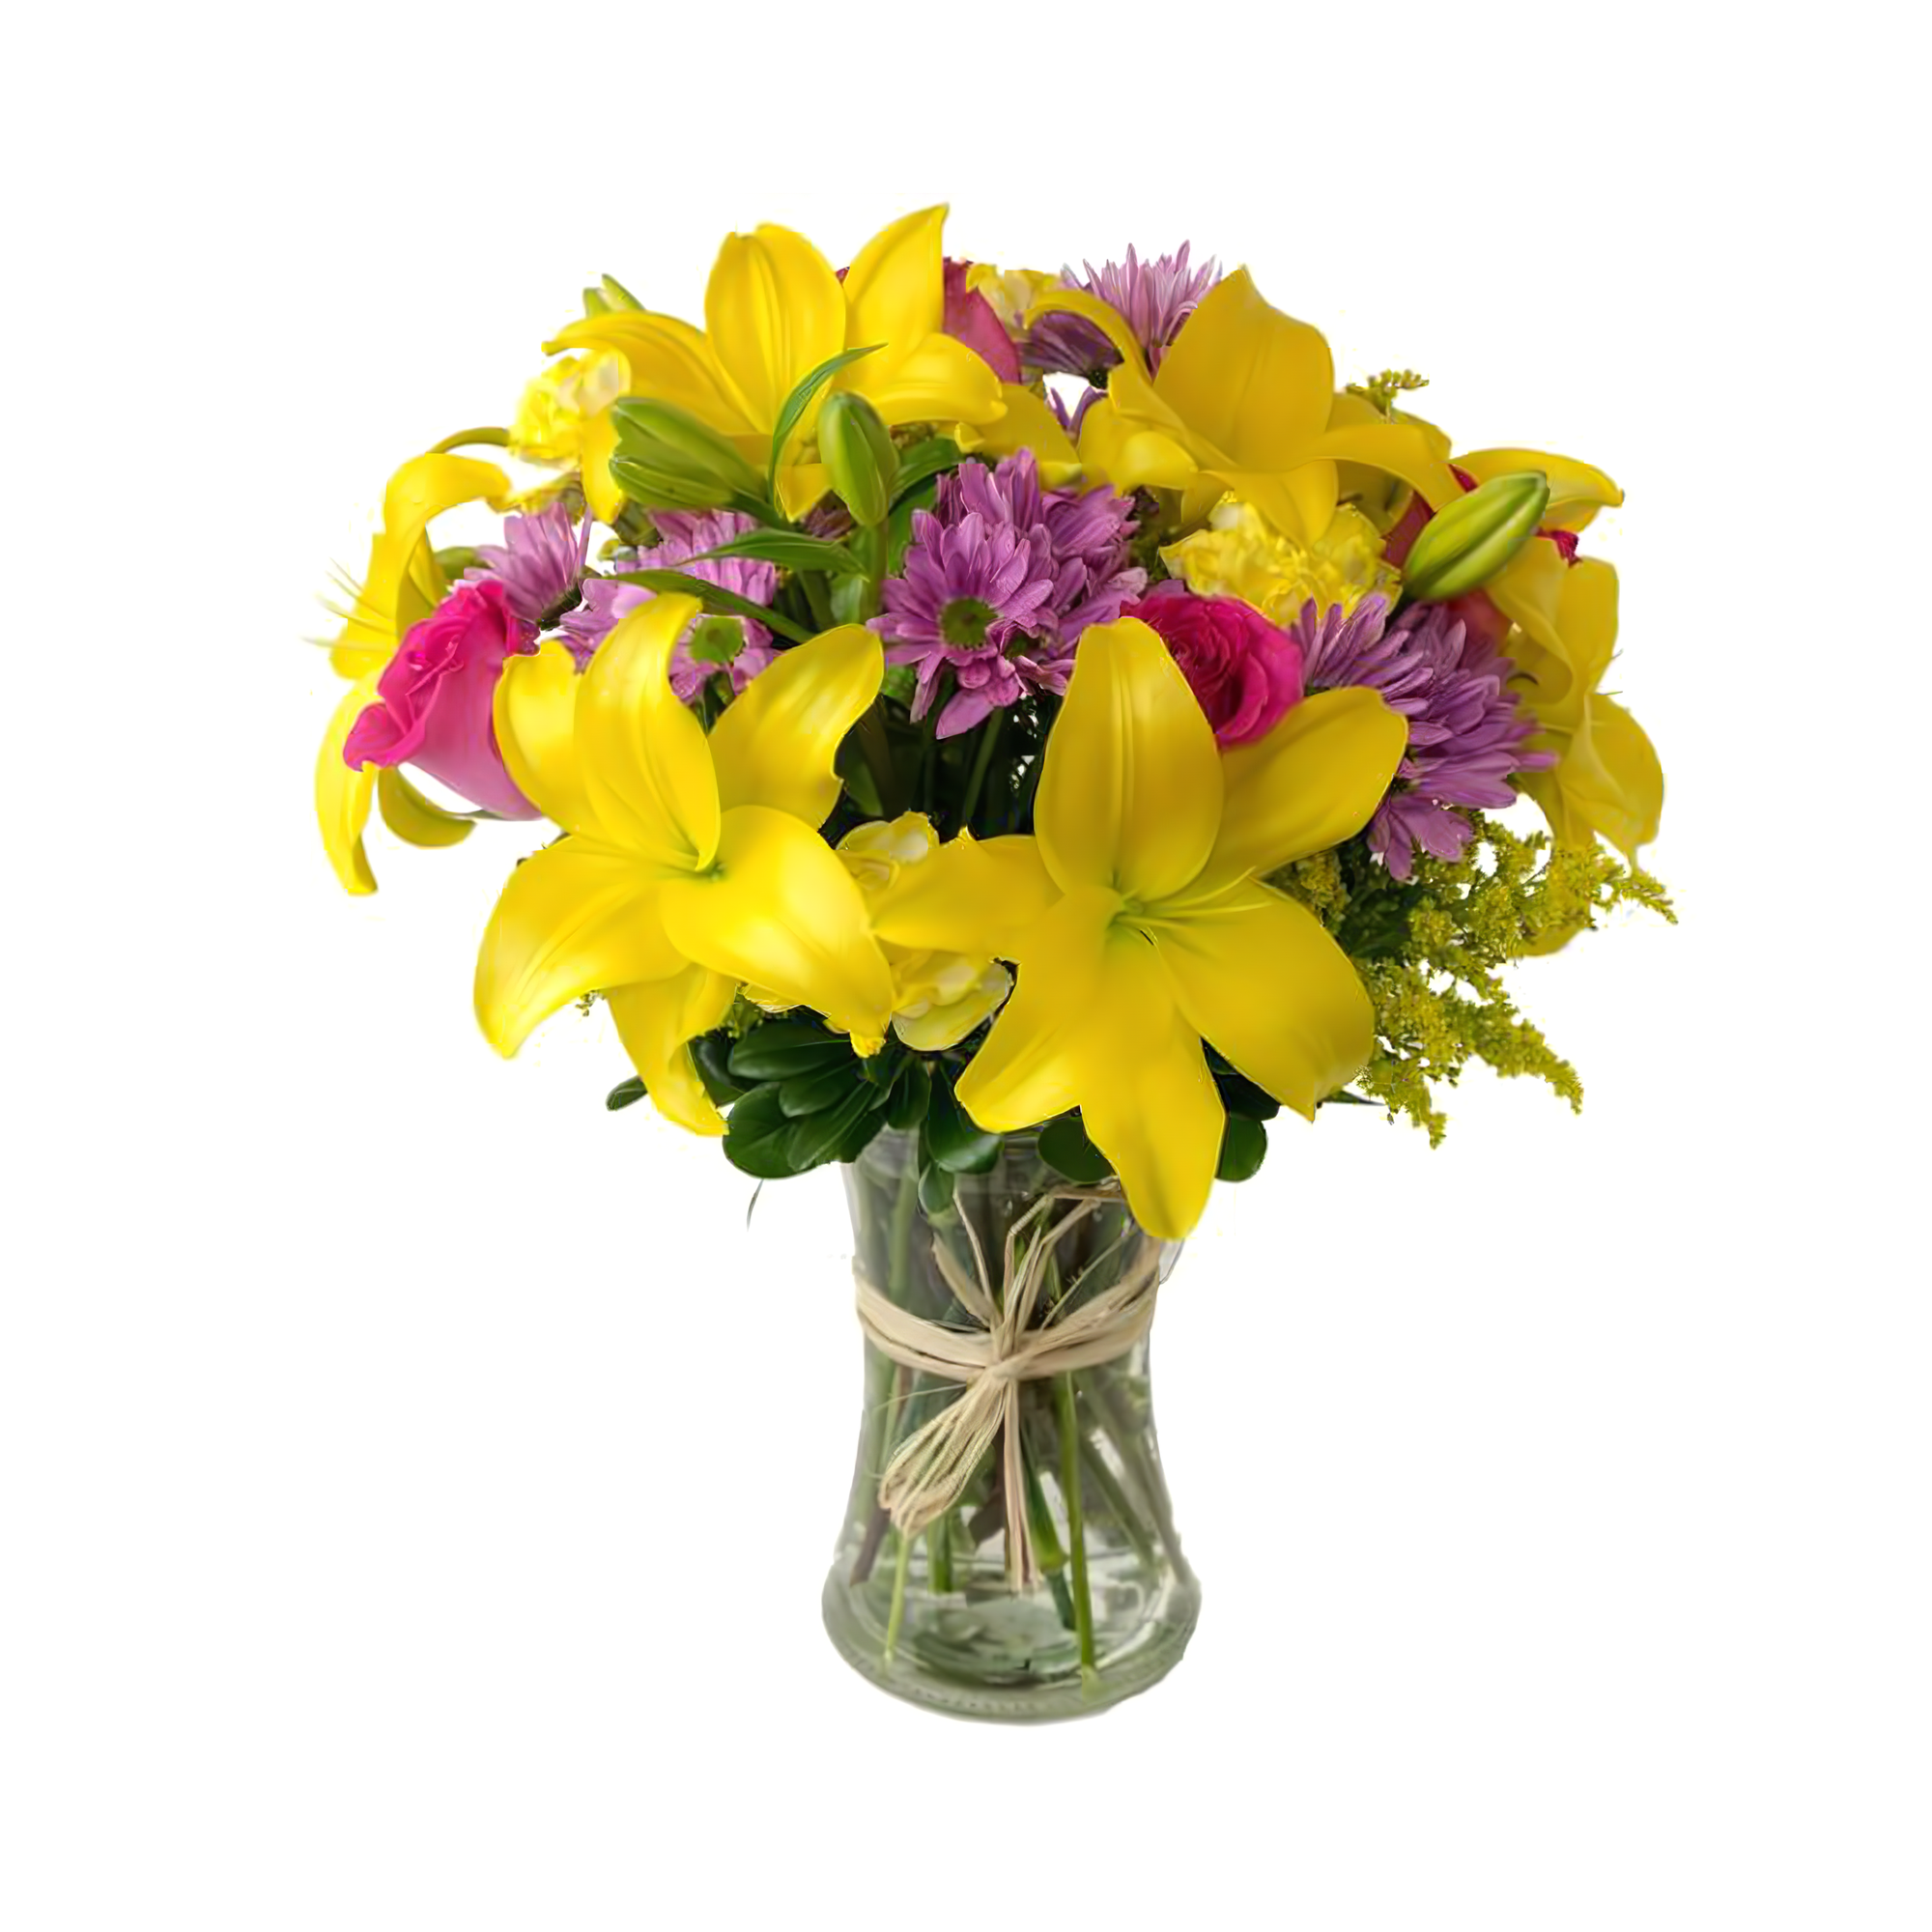 Manhattan Flower Delivery - Pastels Dreams - Seasonal > Mother's Day - 5/9